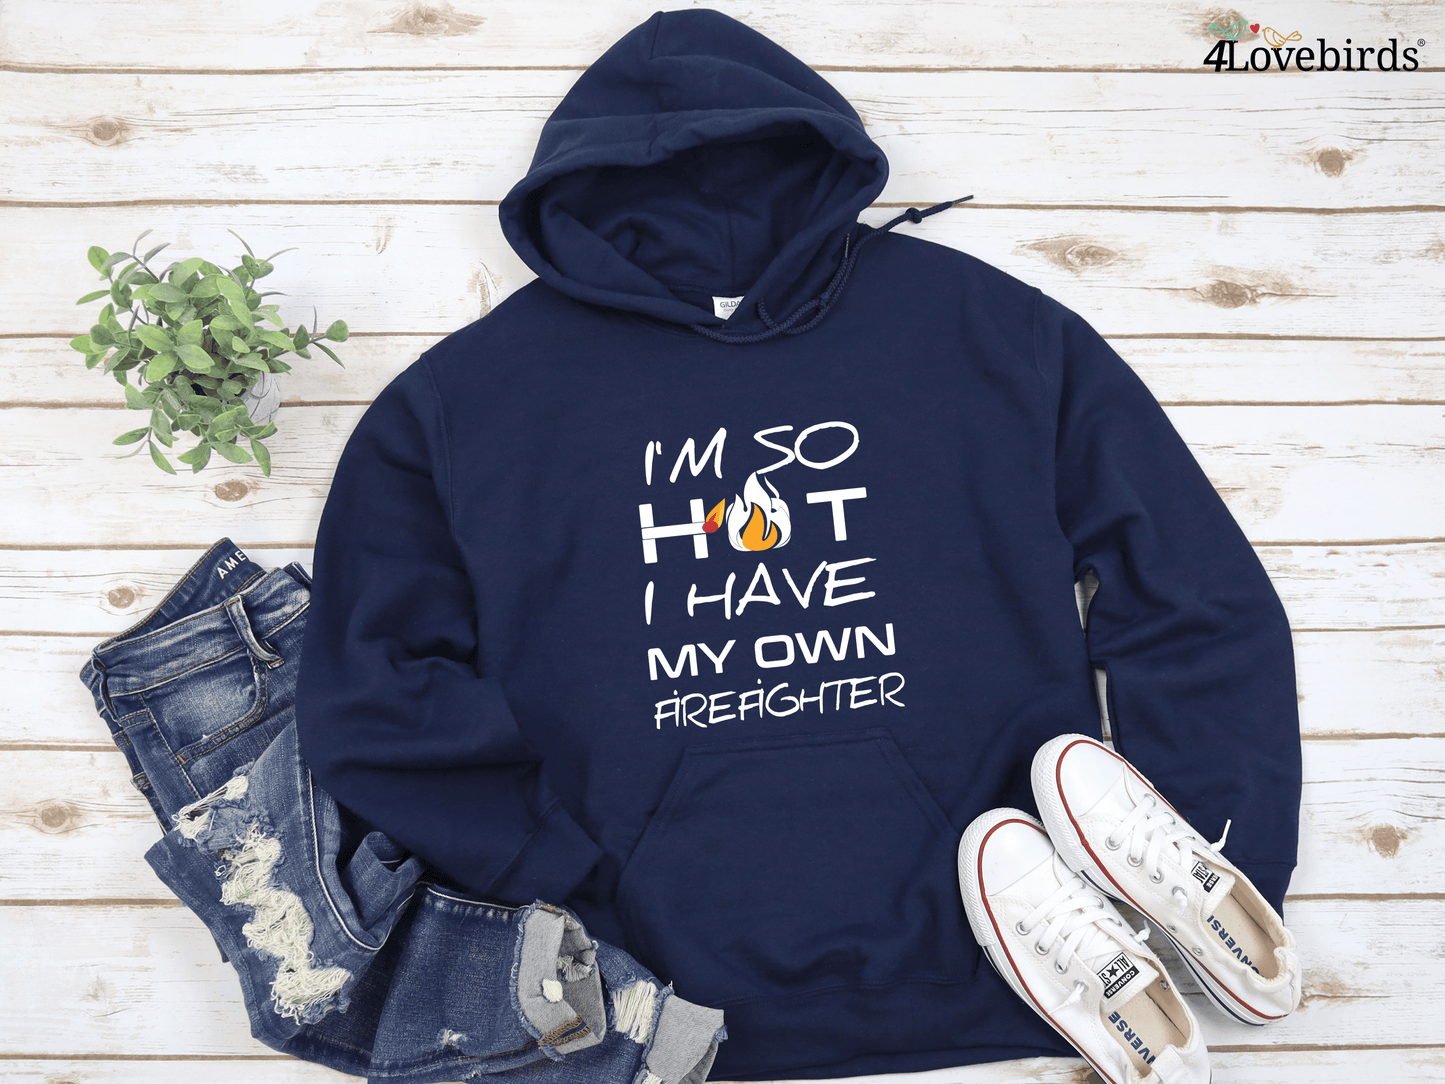 I'm So Hot I Have My Own Firefighter T-Shirt, Firefighter Couple Hoodies, Cute Couple Sweatshirts, Wedding Gifts, Couple Gifts - 4Lovebirds